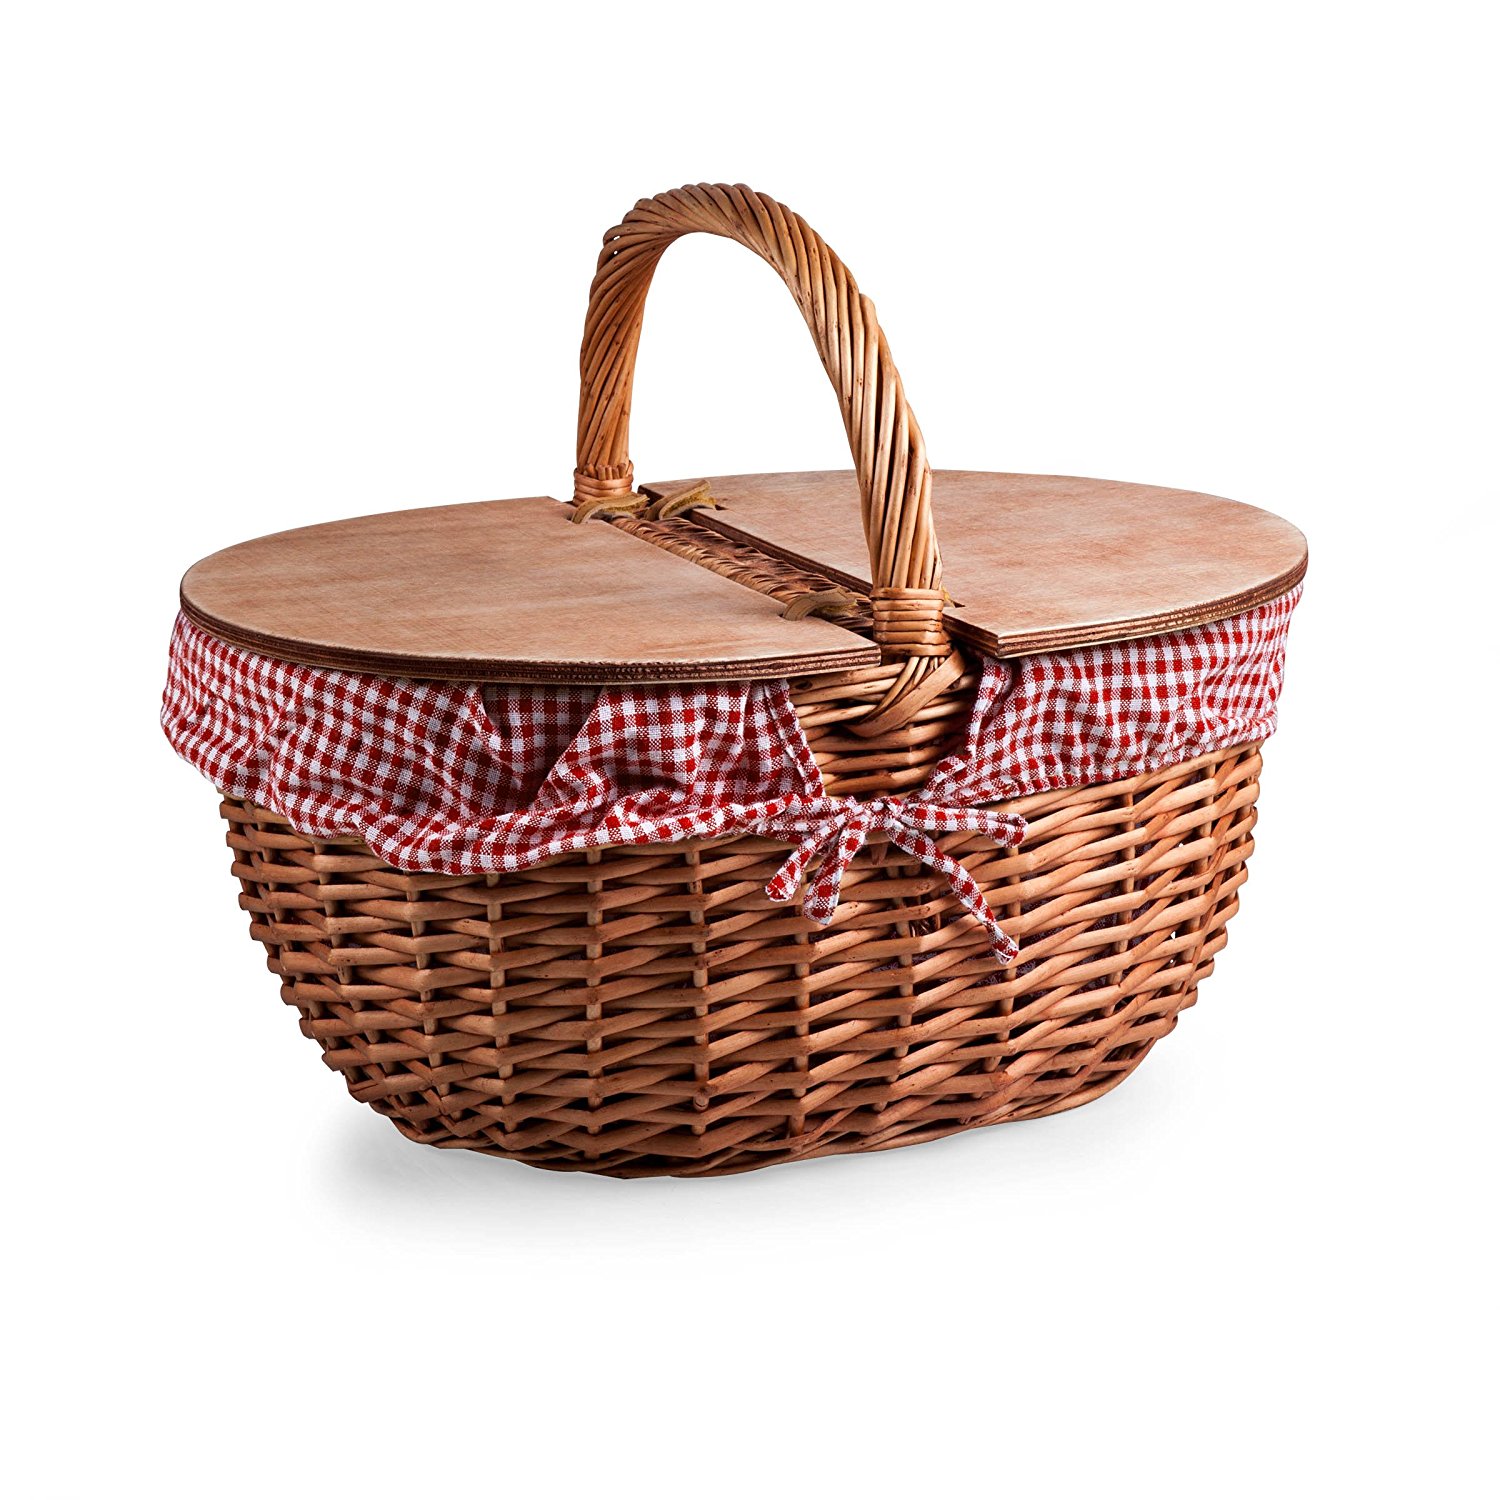 Amazon.com: Picnic Time Country Picnic Basket with Red/White Gingham ...